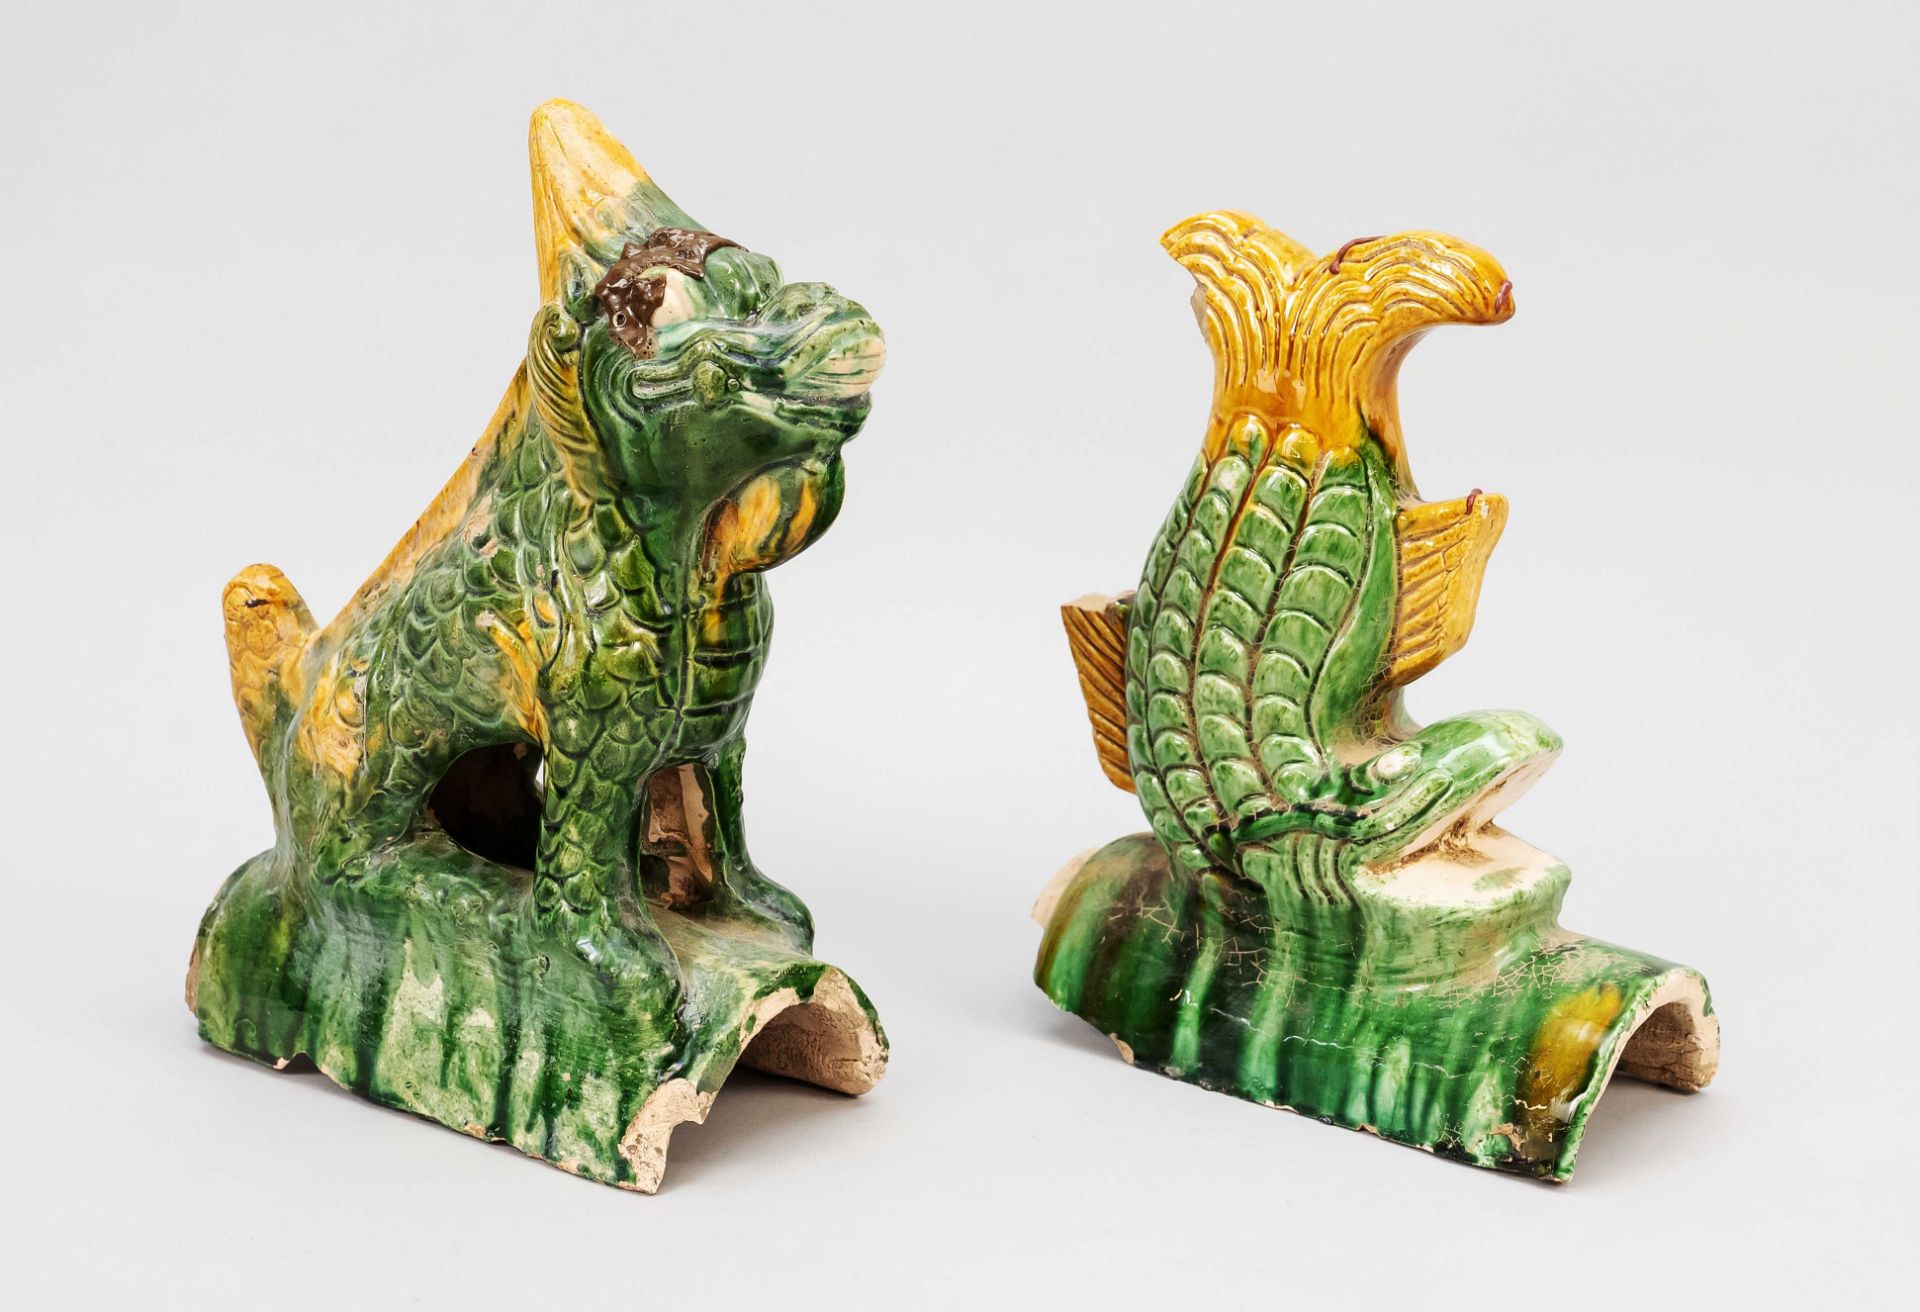 Two ridge turrets, China, 20th c., in the style of the Ming dynasty(1368-1644), yellow-green river